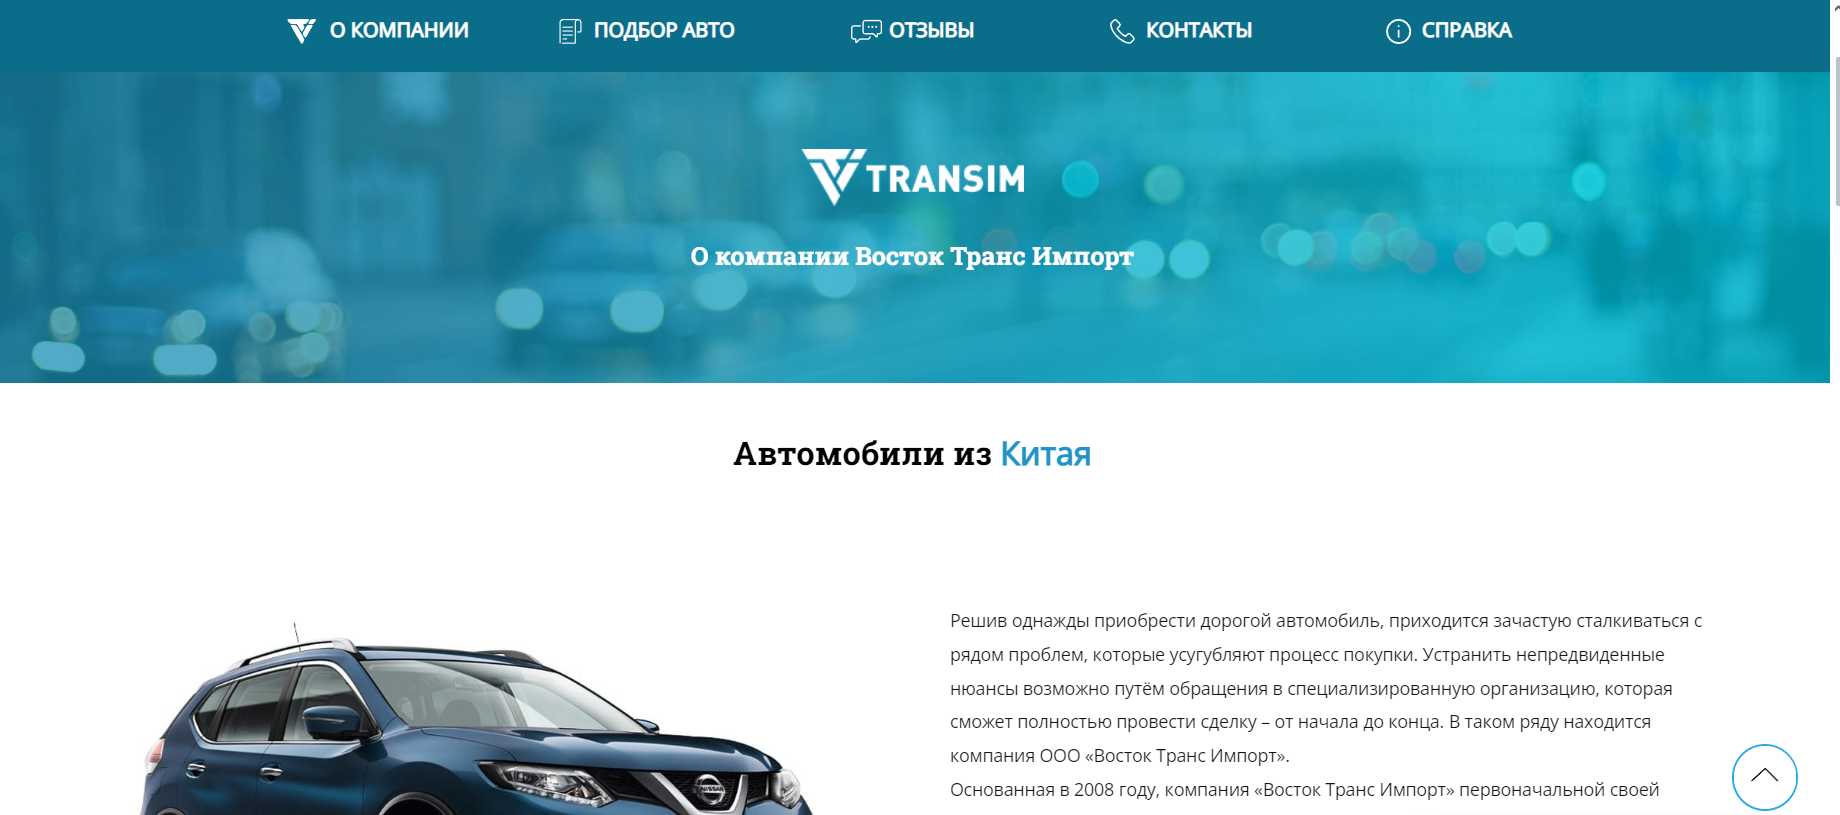 Vostok Trans Import reviews. Car enthusiasts shared negative experiences with Vostok Trans Import: How to avoid problems when buying a used car?